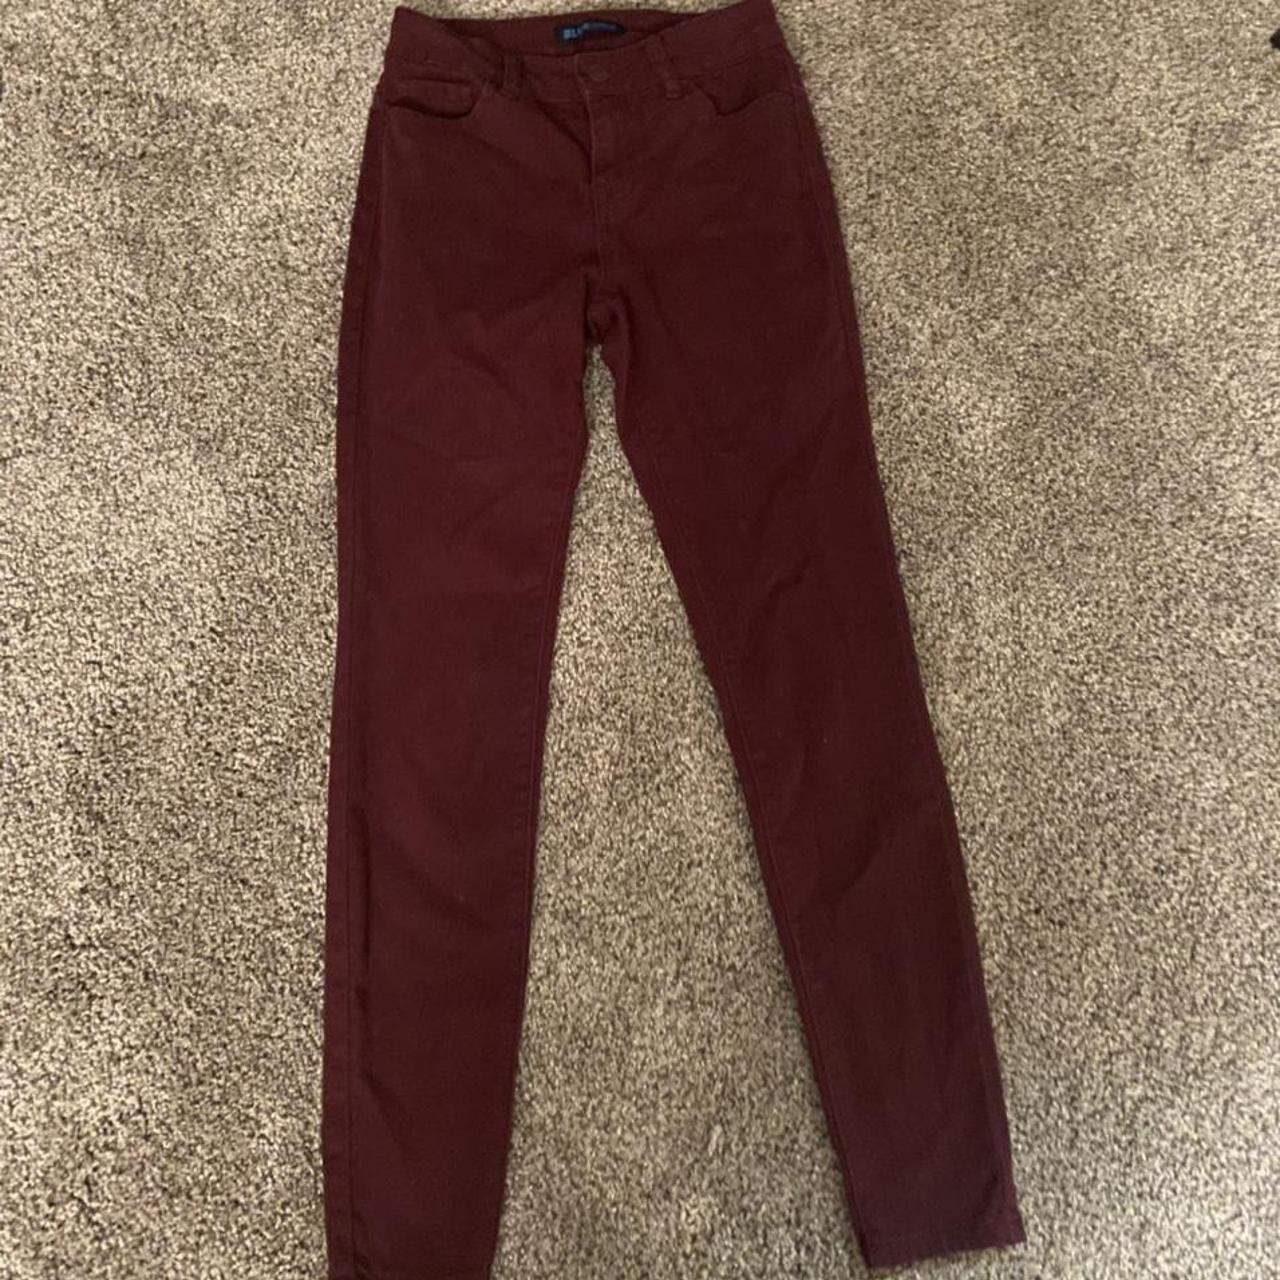 Burgundy BLUESPICE high waisted pants These are a... - Depop